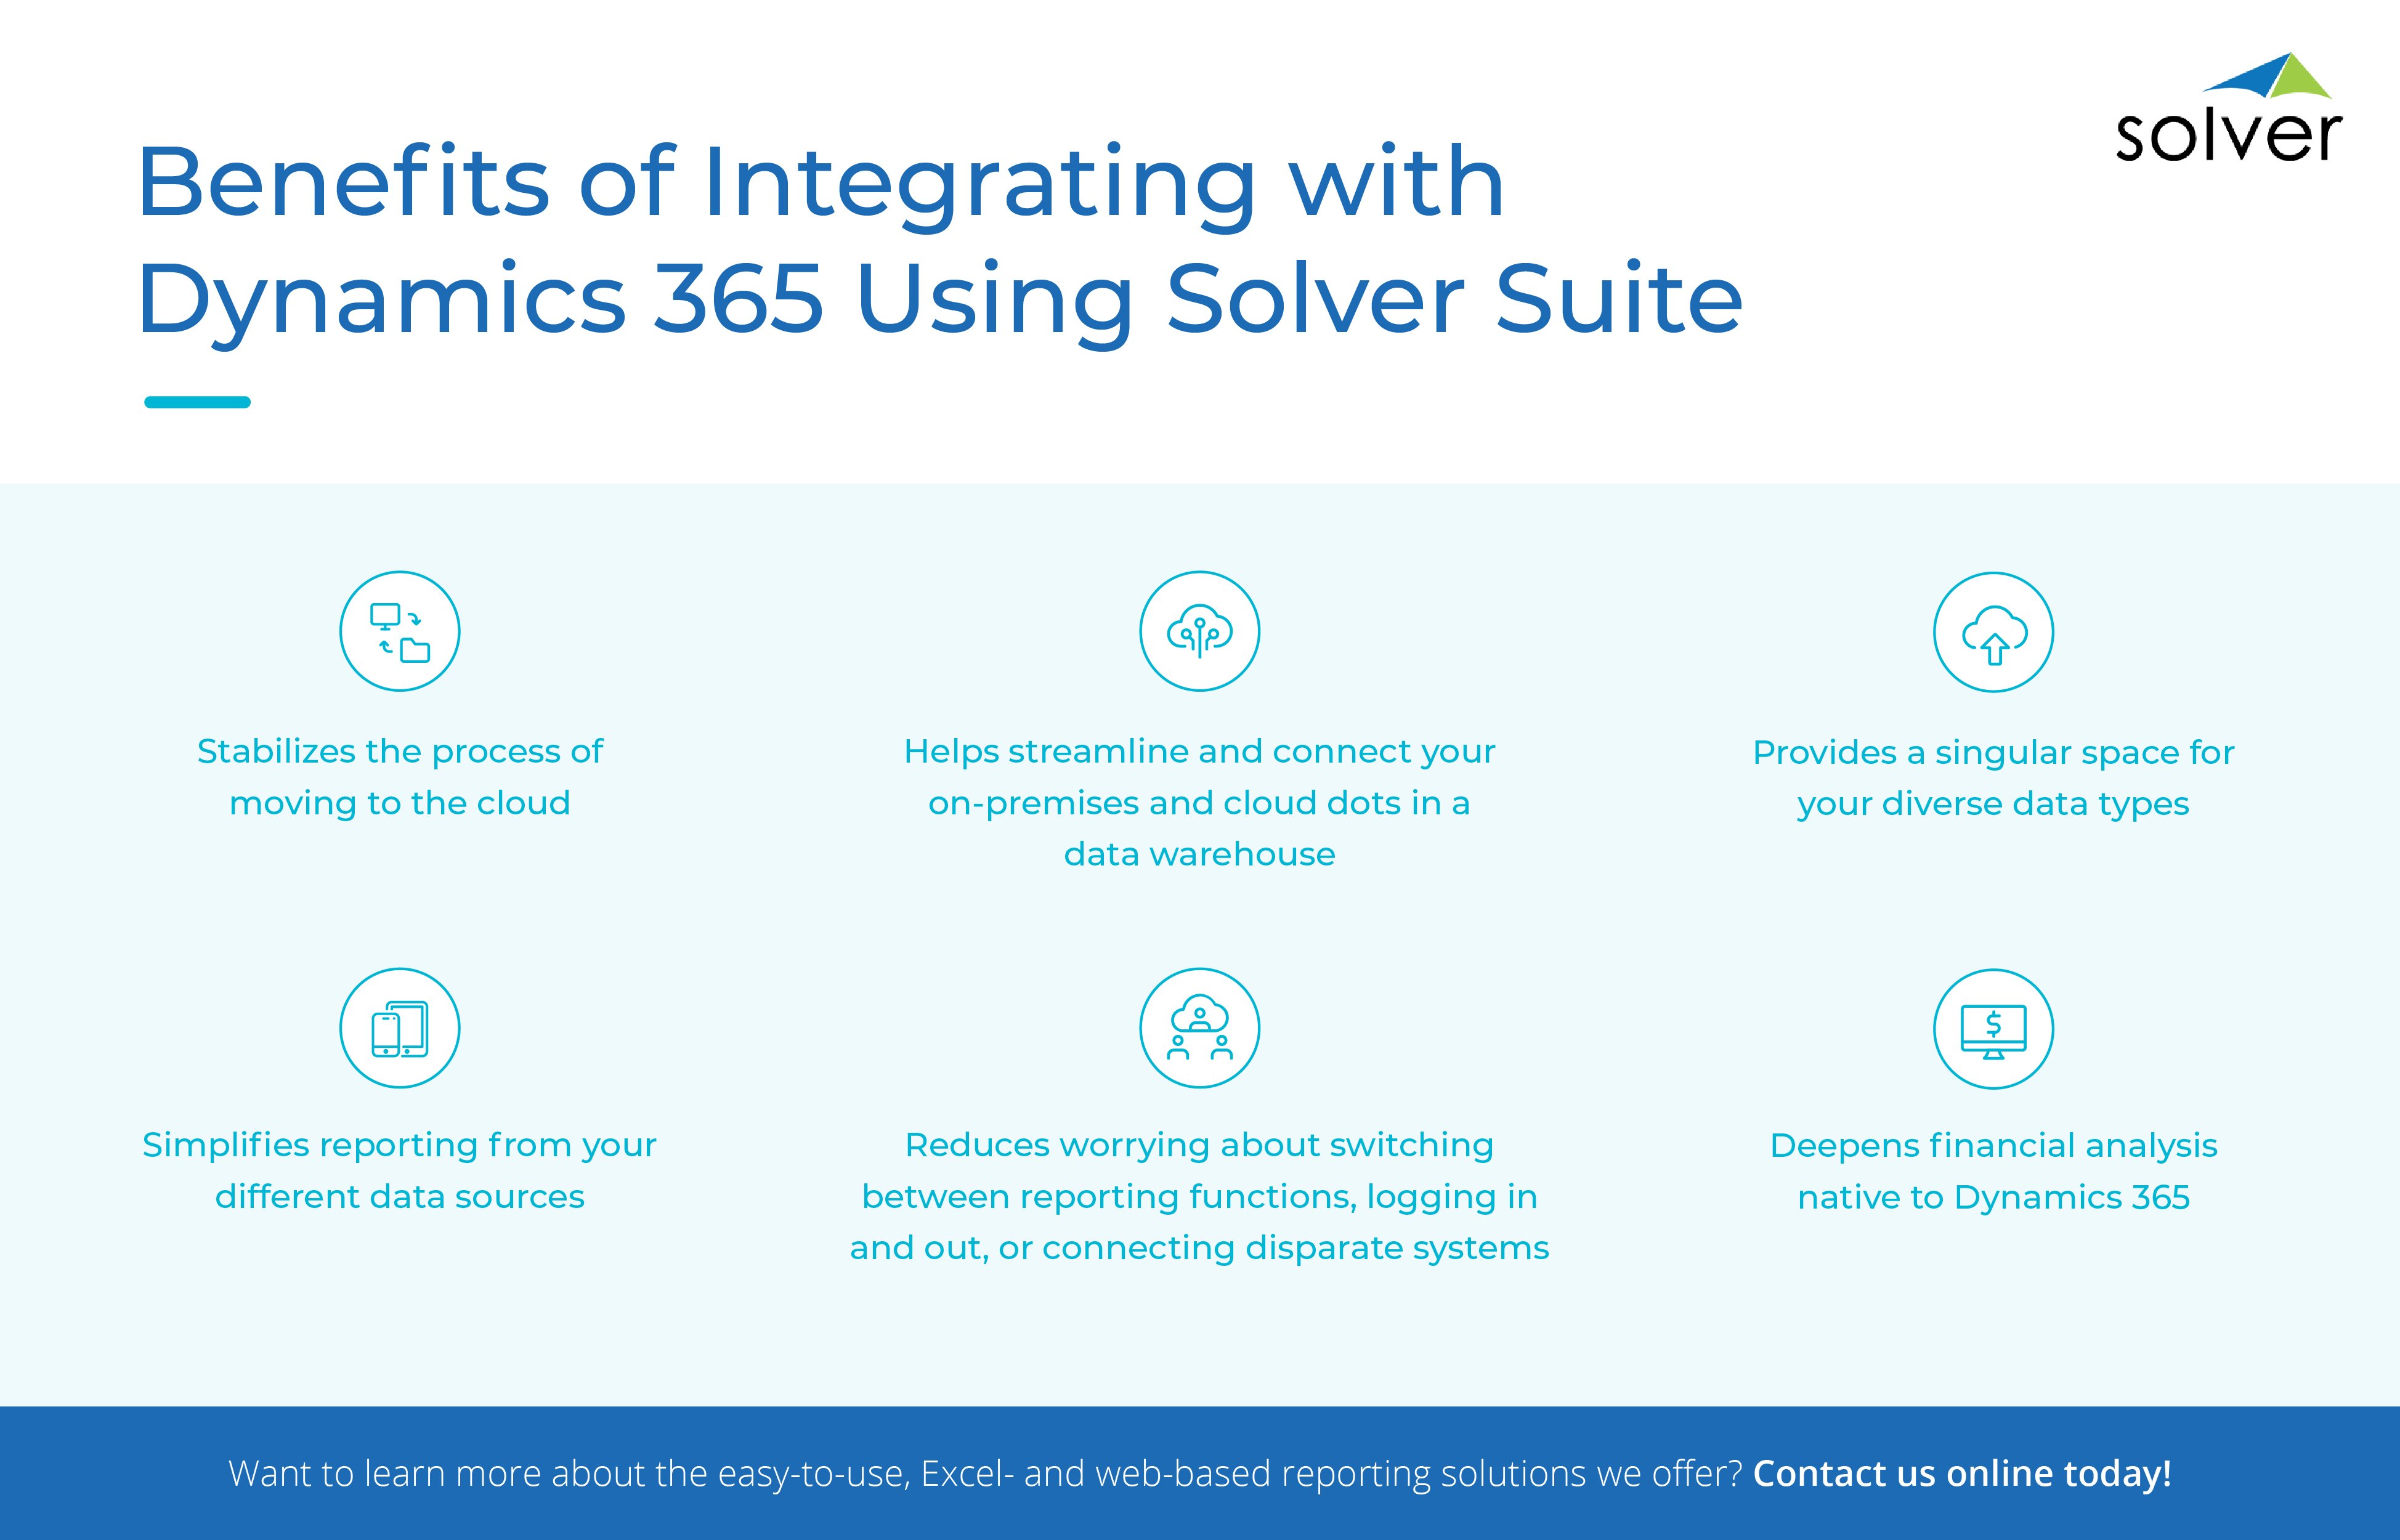 Benefits of integrating with Dynamics 365